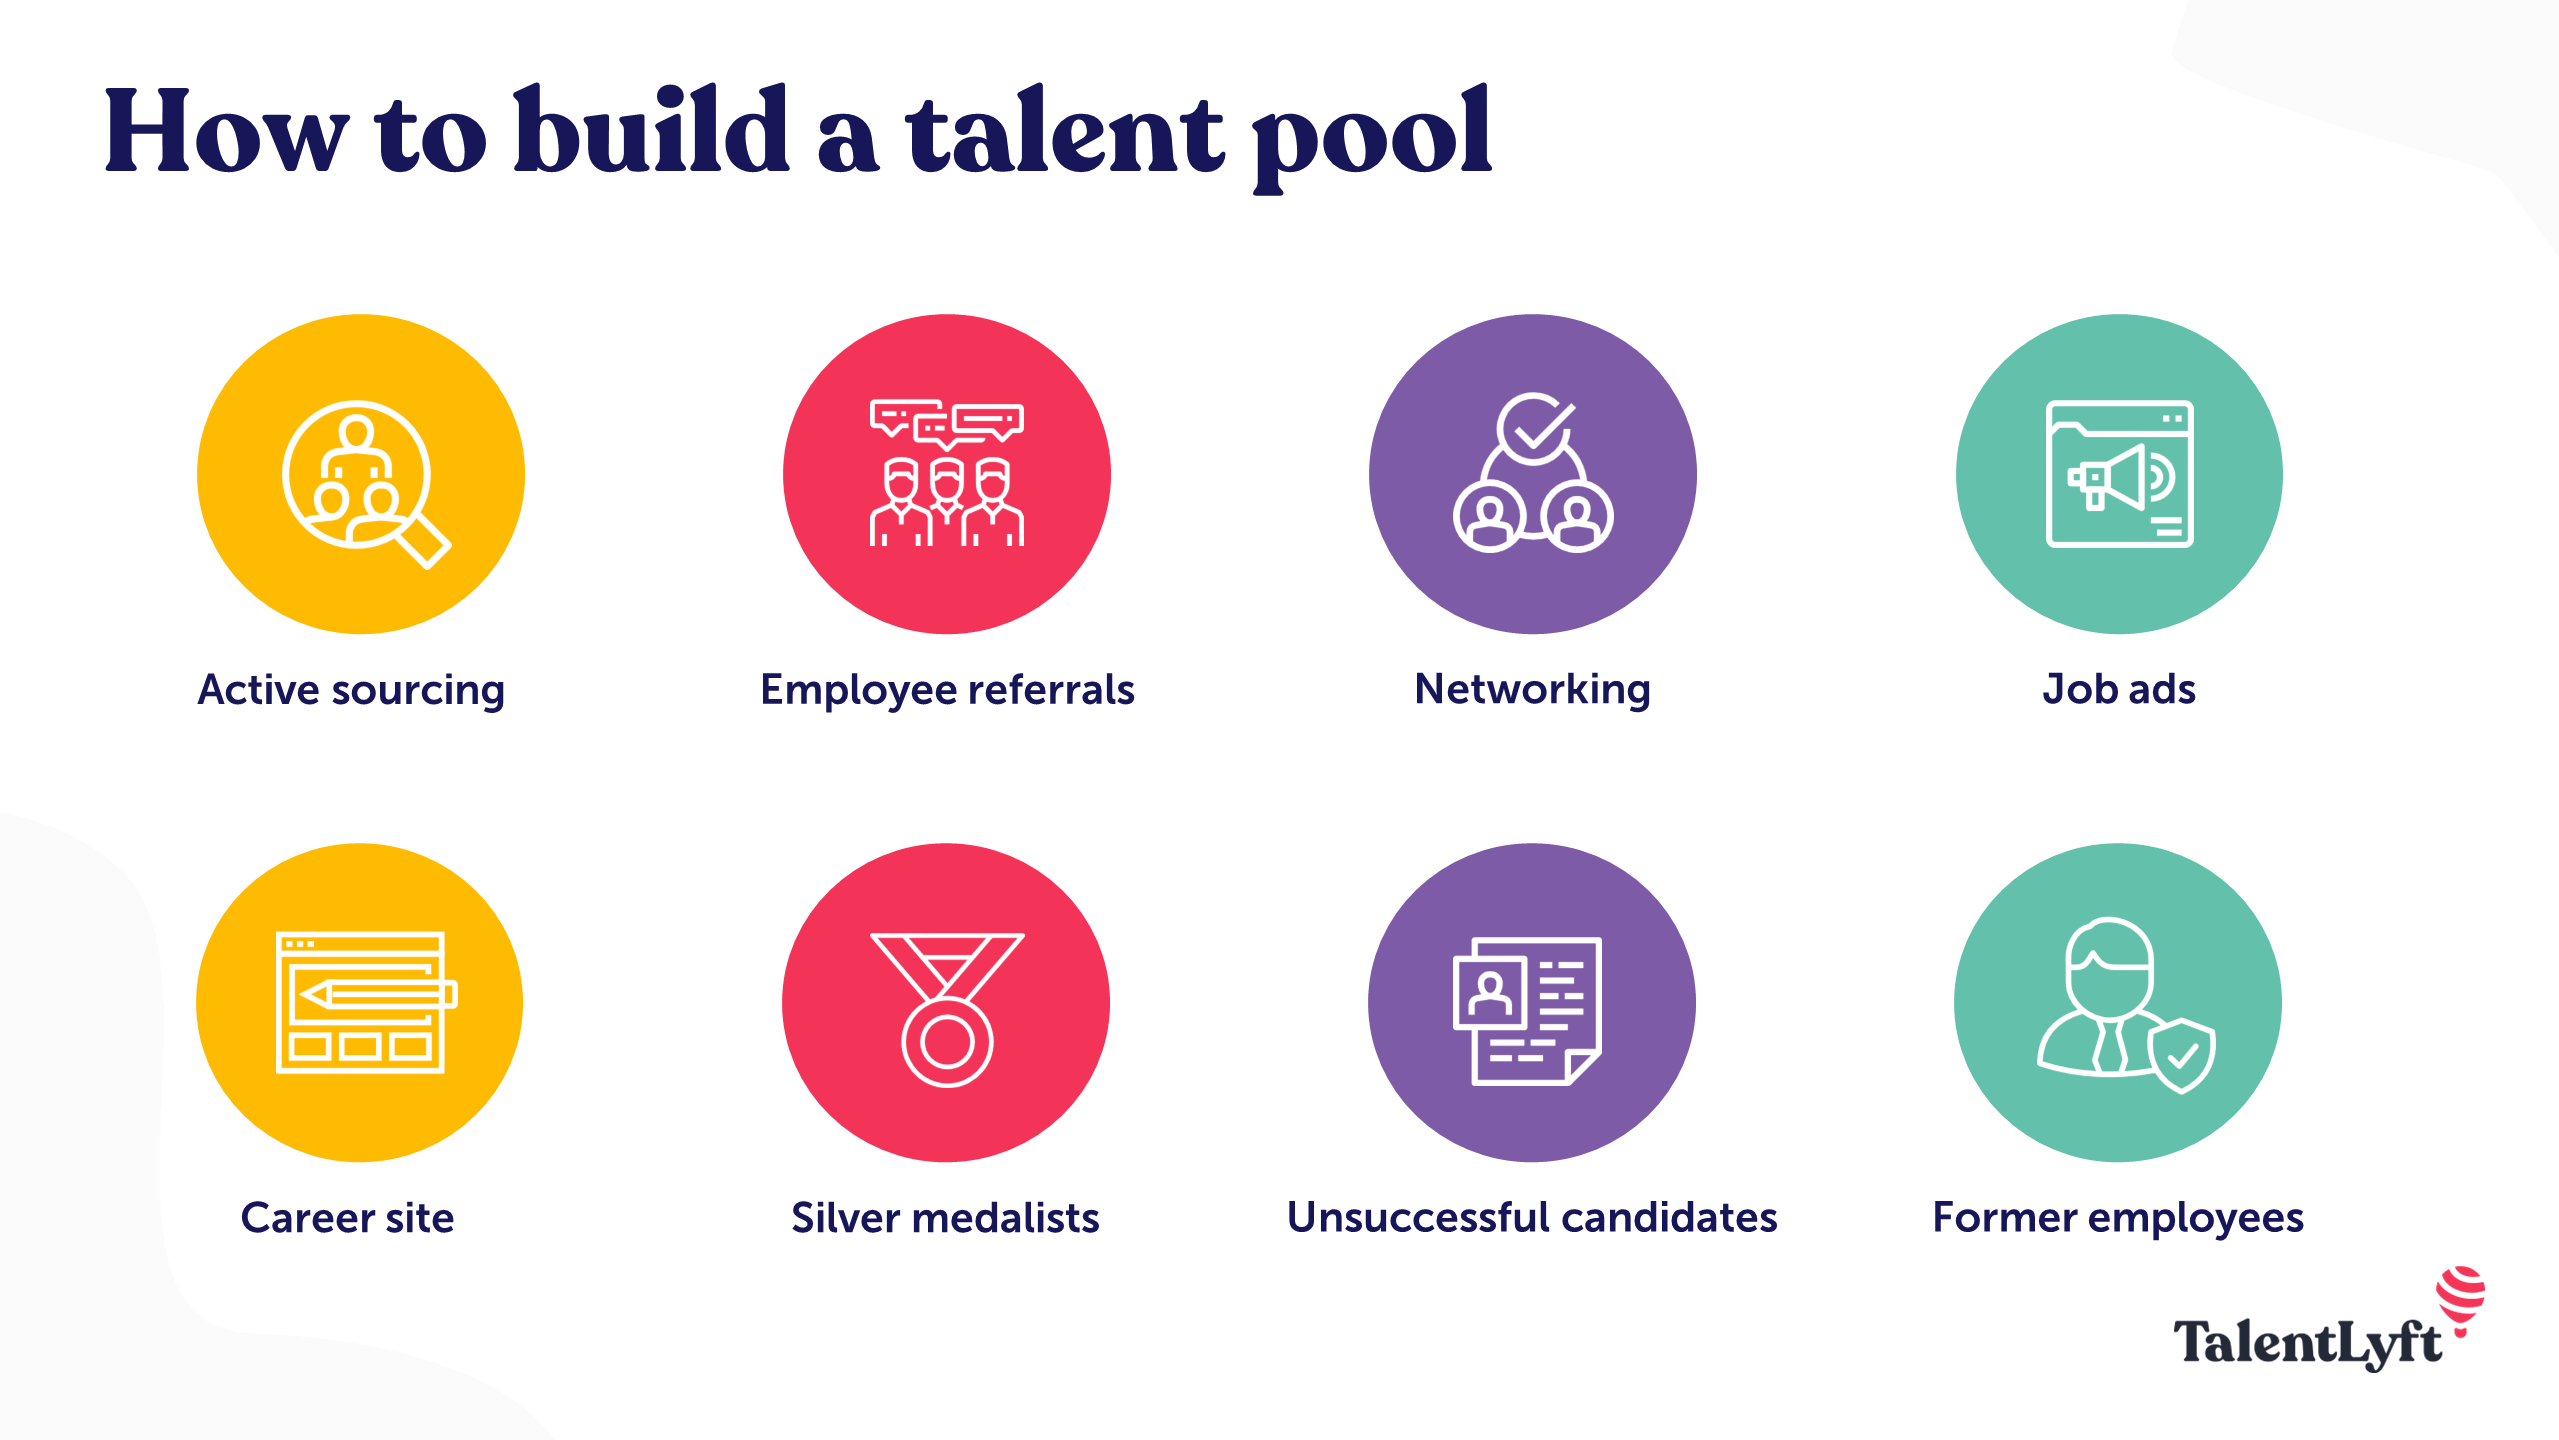 8 ways of building a talent pool